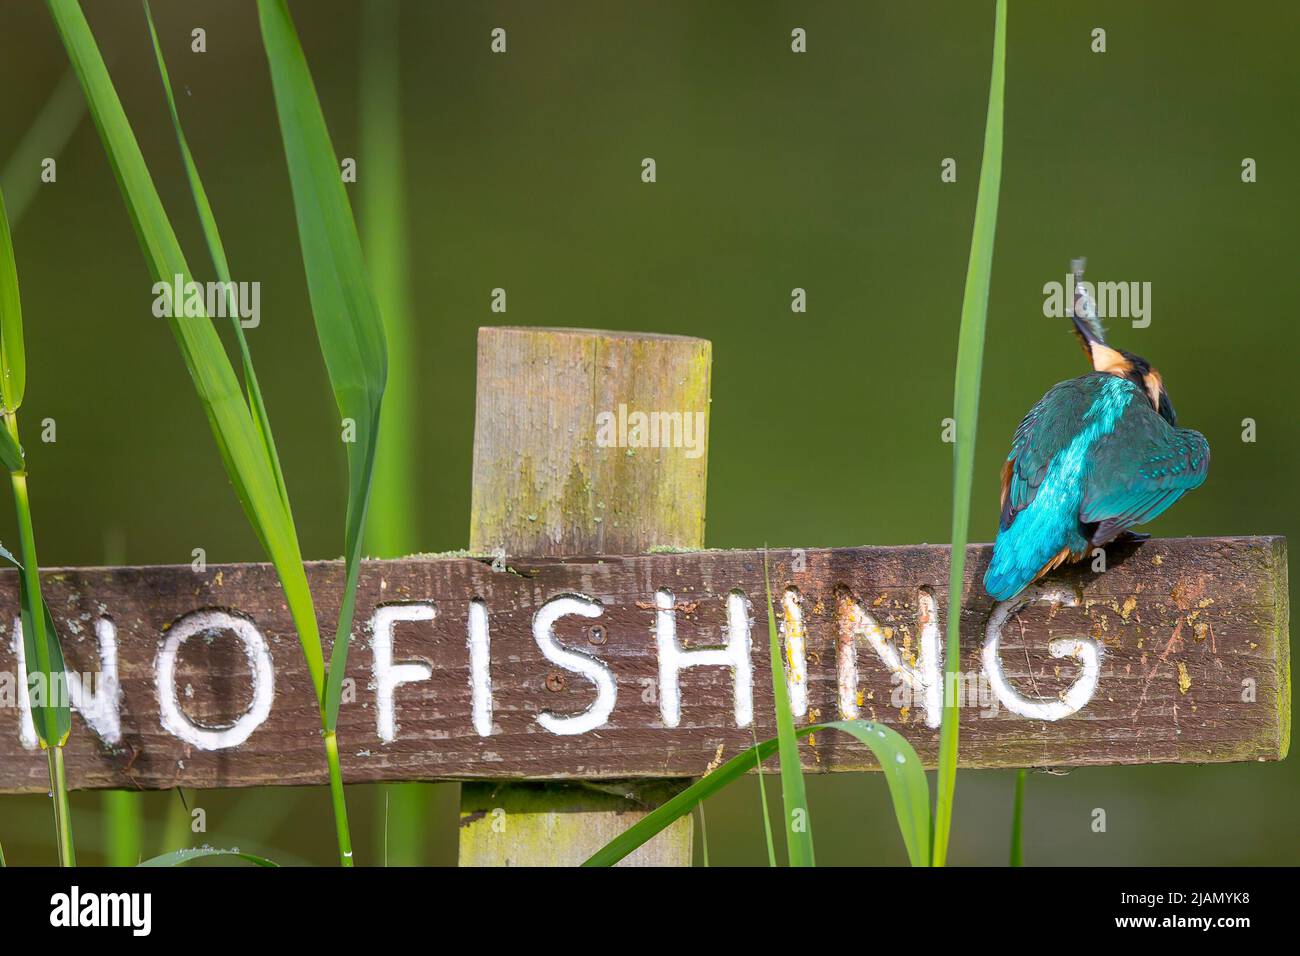 Kidderminster, UK. 31st May, 2022. UK weather: sunny bright spells inbetween some light showers offer this kingfisher a little riverbank fishing time clearly ignoring the No Fishing sign! Credit: Lee Hudson/Alamy Live News Stock Photo